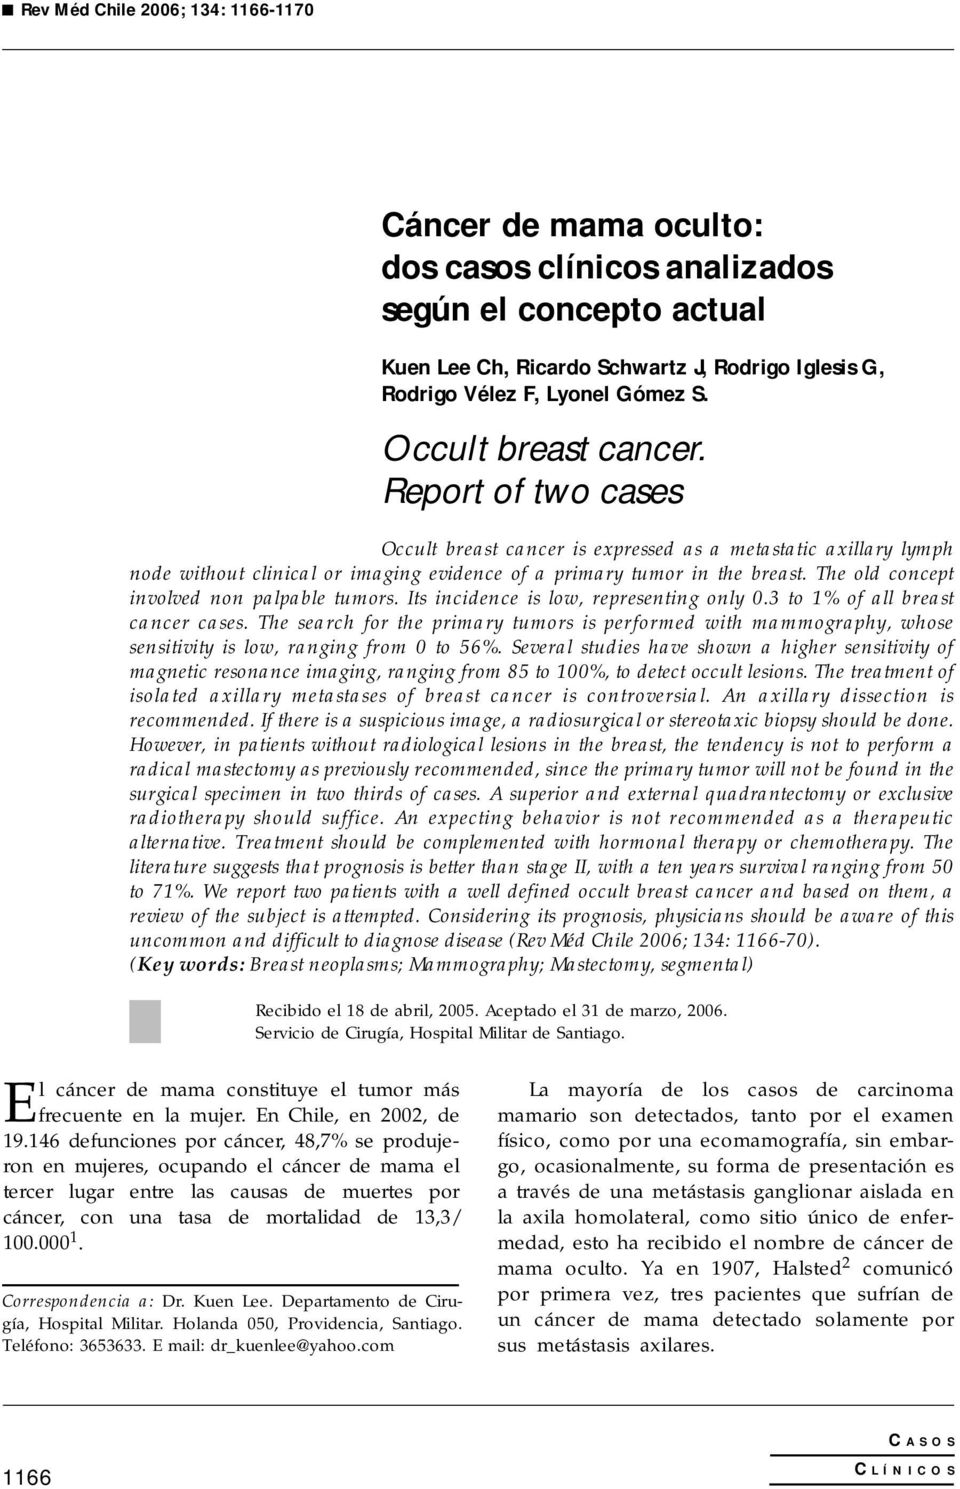 The old concept involved non palpable tumors. Its incidence is low, representing only 0.3 to 1% of all breast cancer cases.